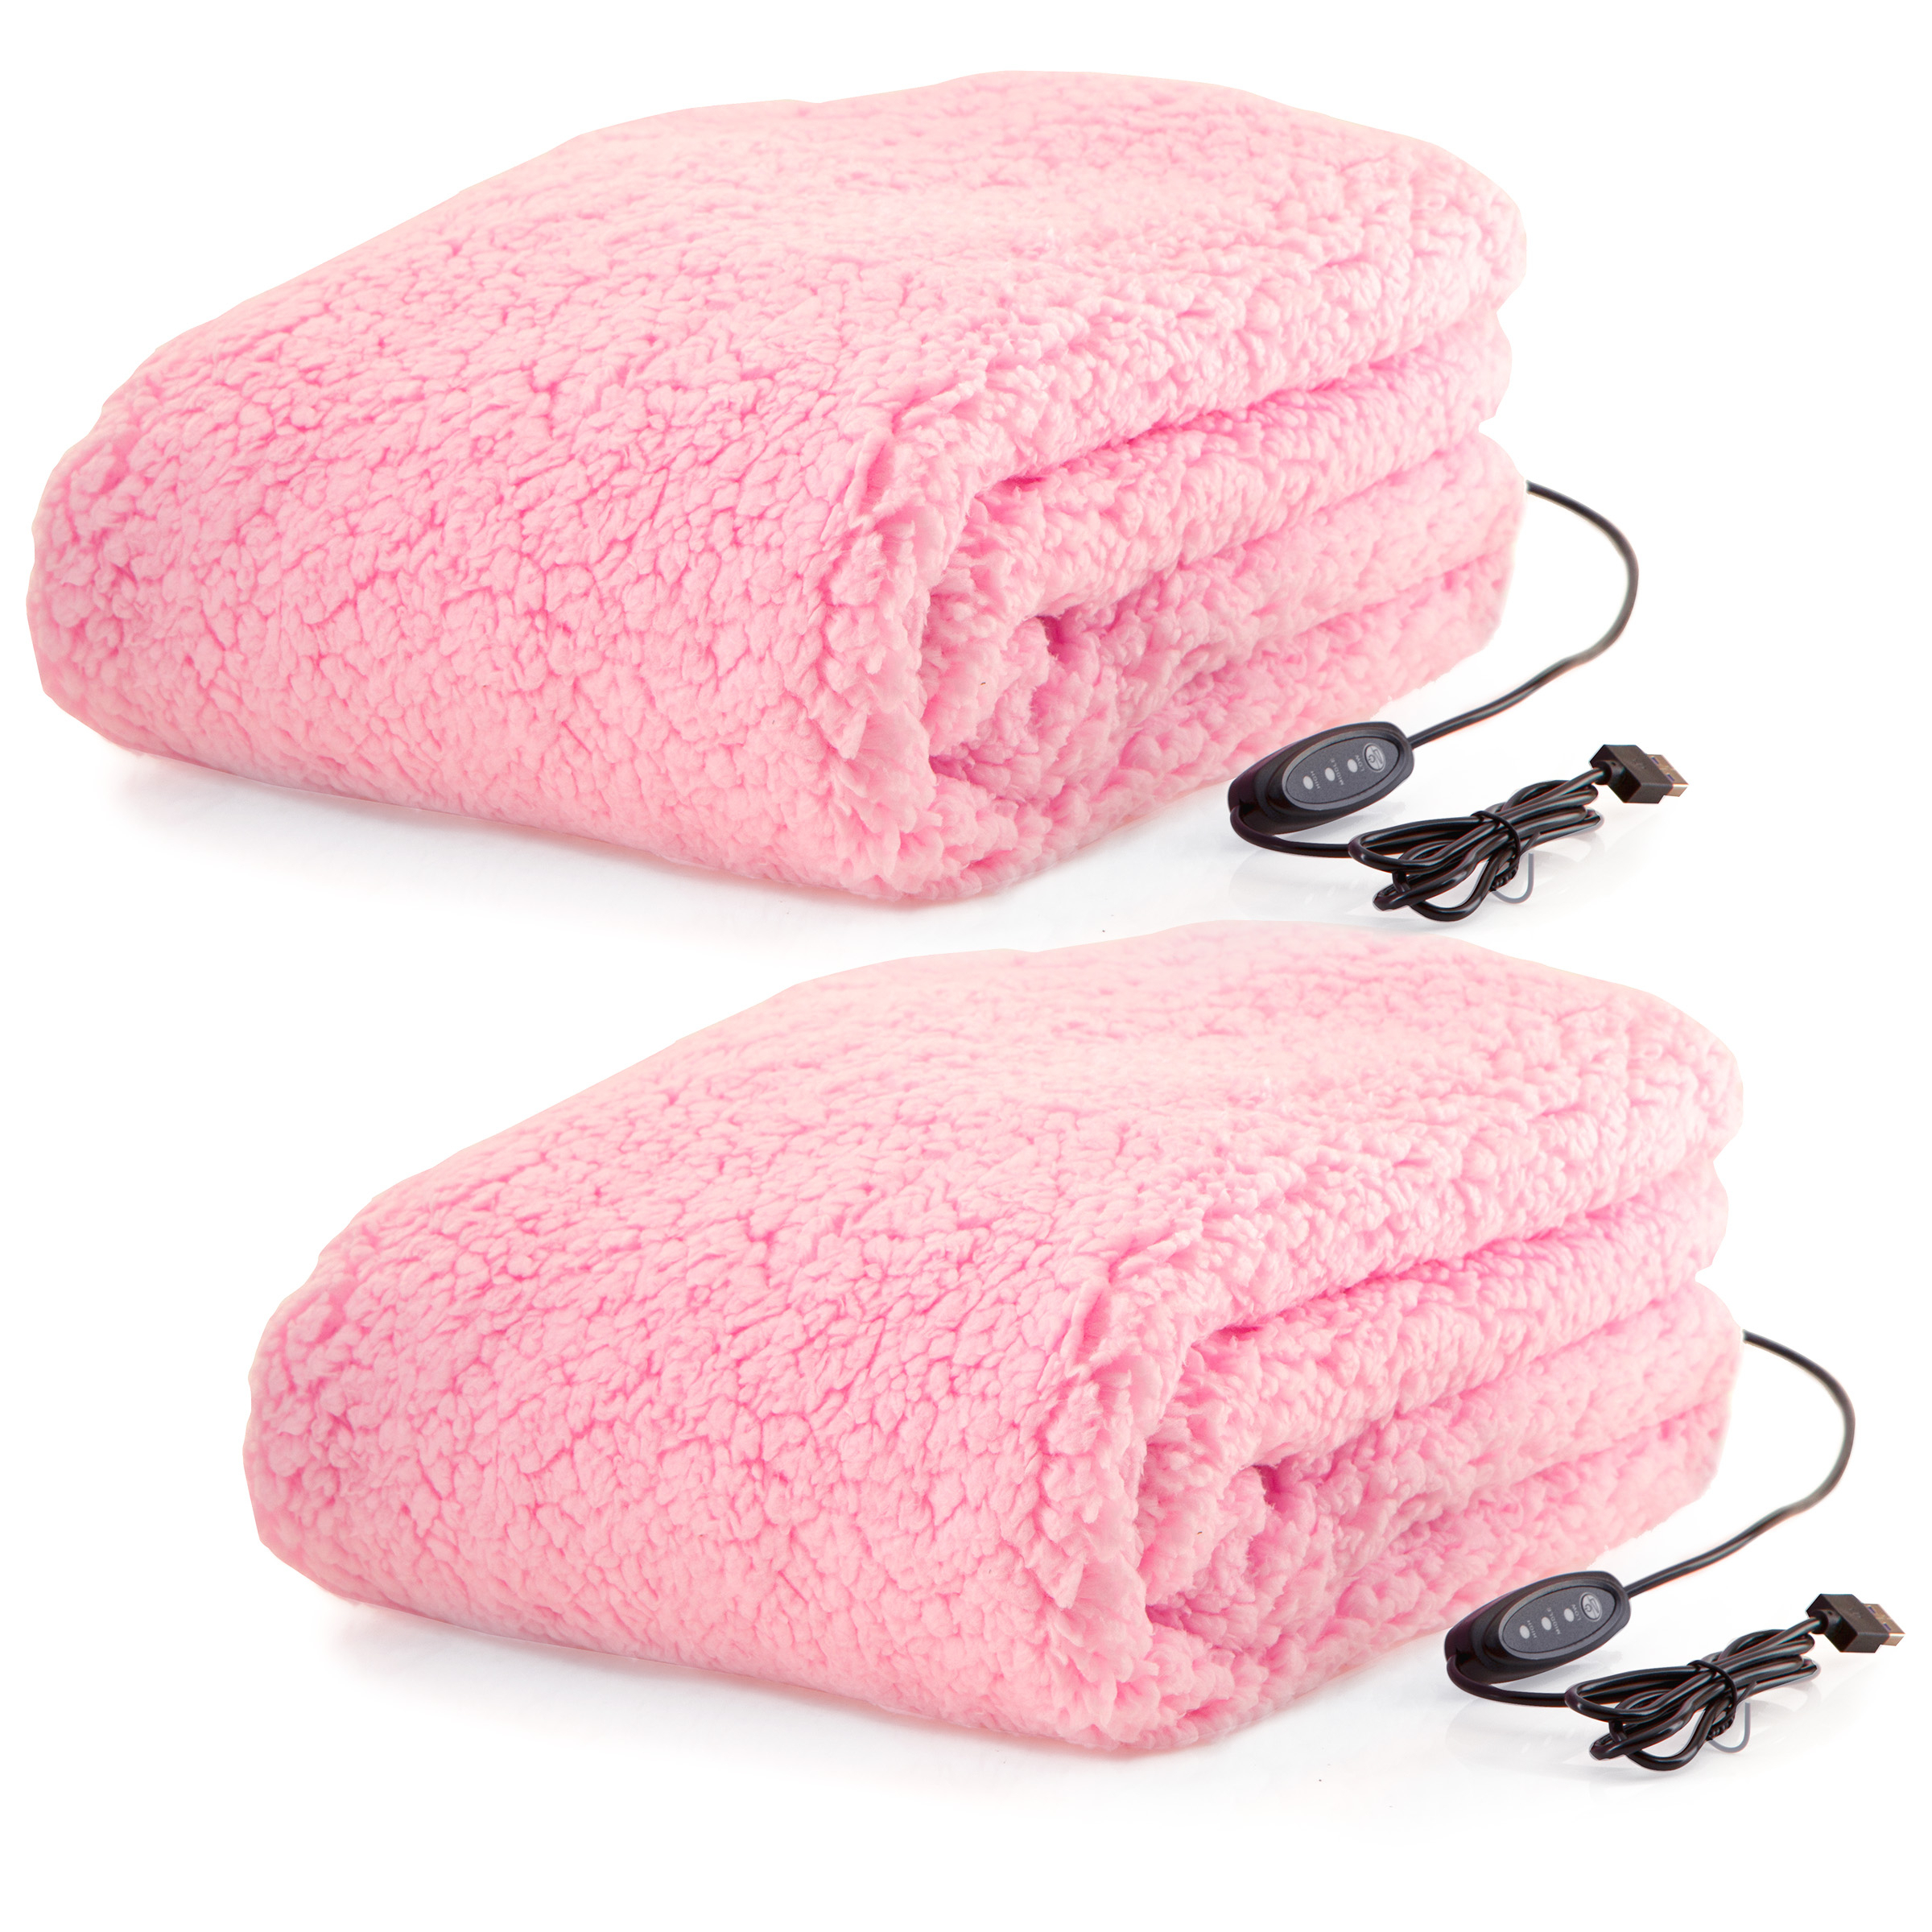 2Pack Heated Blanket USB-Powered Sherpa Throw Blankets Winter Car Accessories - Pink